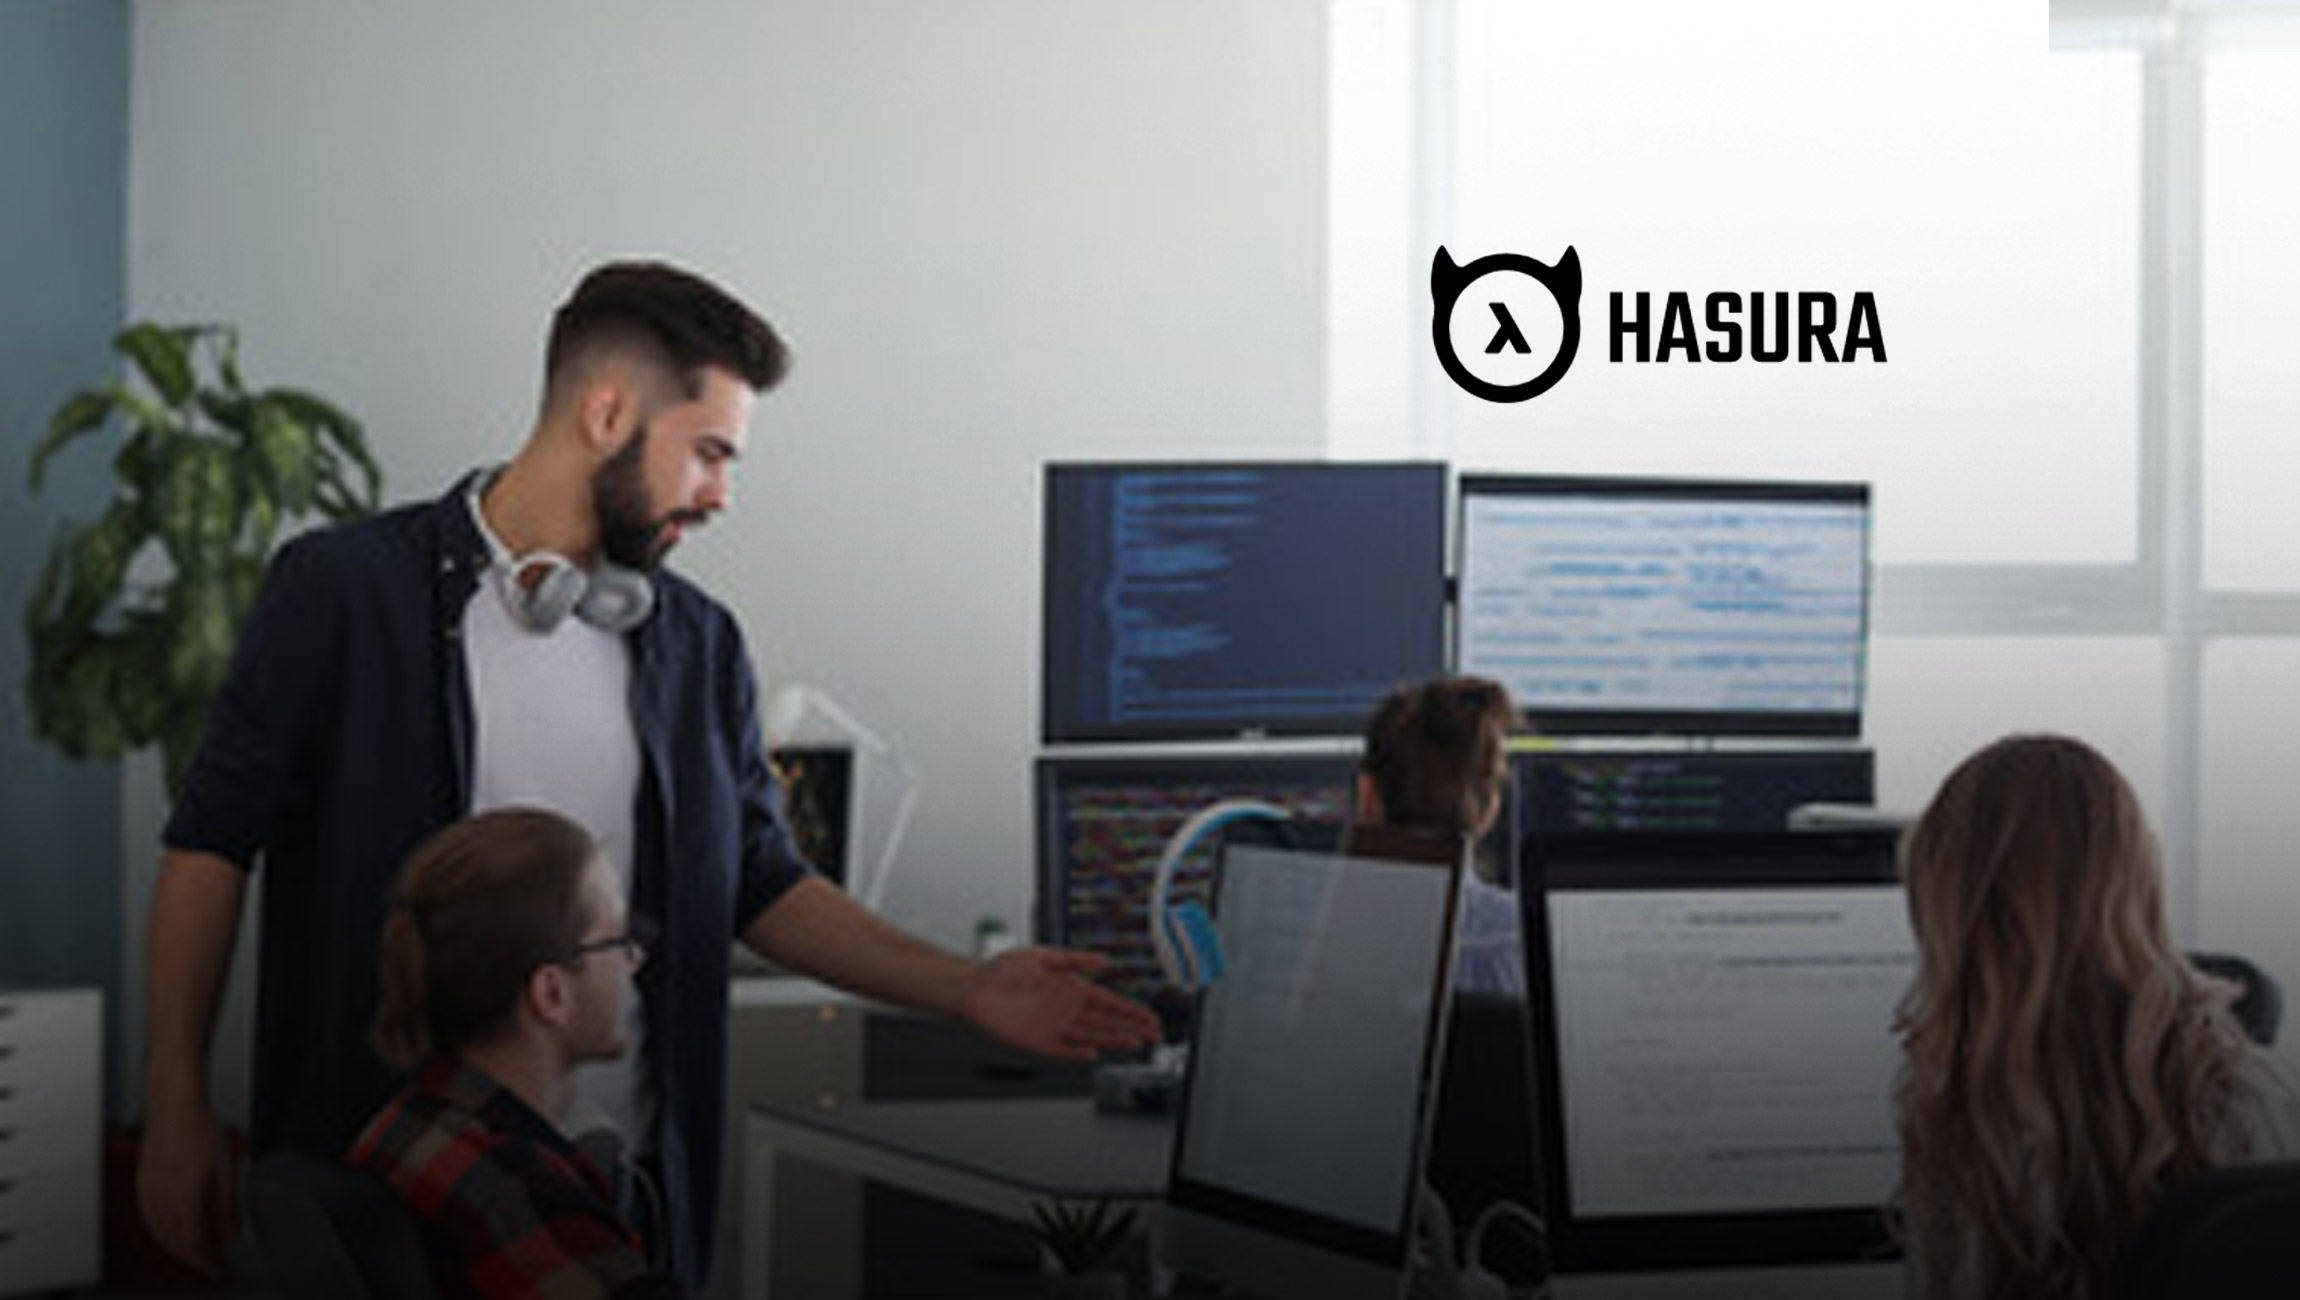 Hasura Releases Enterprise Grade Features so Developers Can Build Mission-Critical Applications Faster